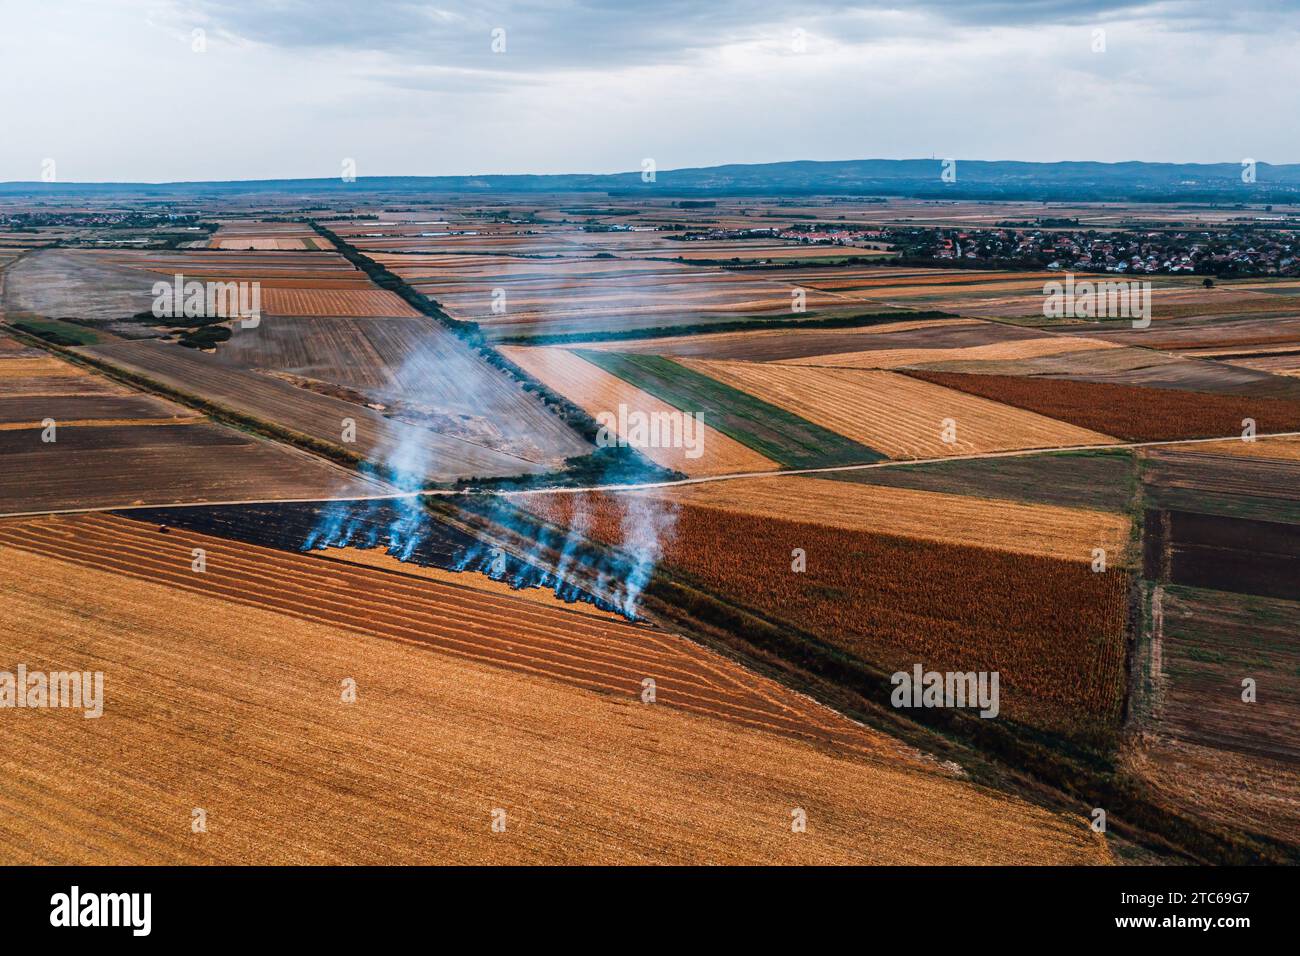 Wheat field stubble burning after the harvesting of grains is one of the major causes of air pollution, aerial shot from drone pov, high angle view Stock Photo